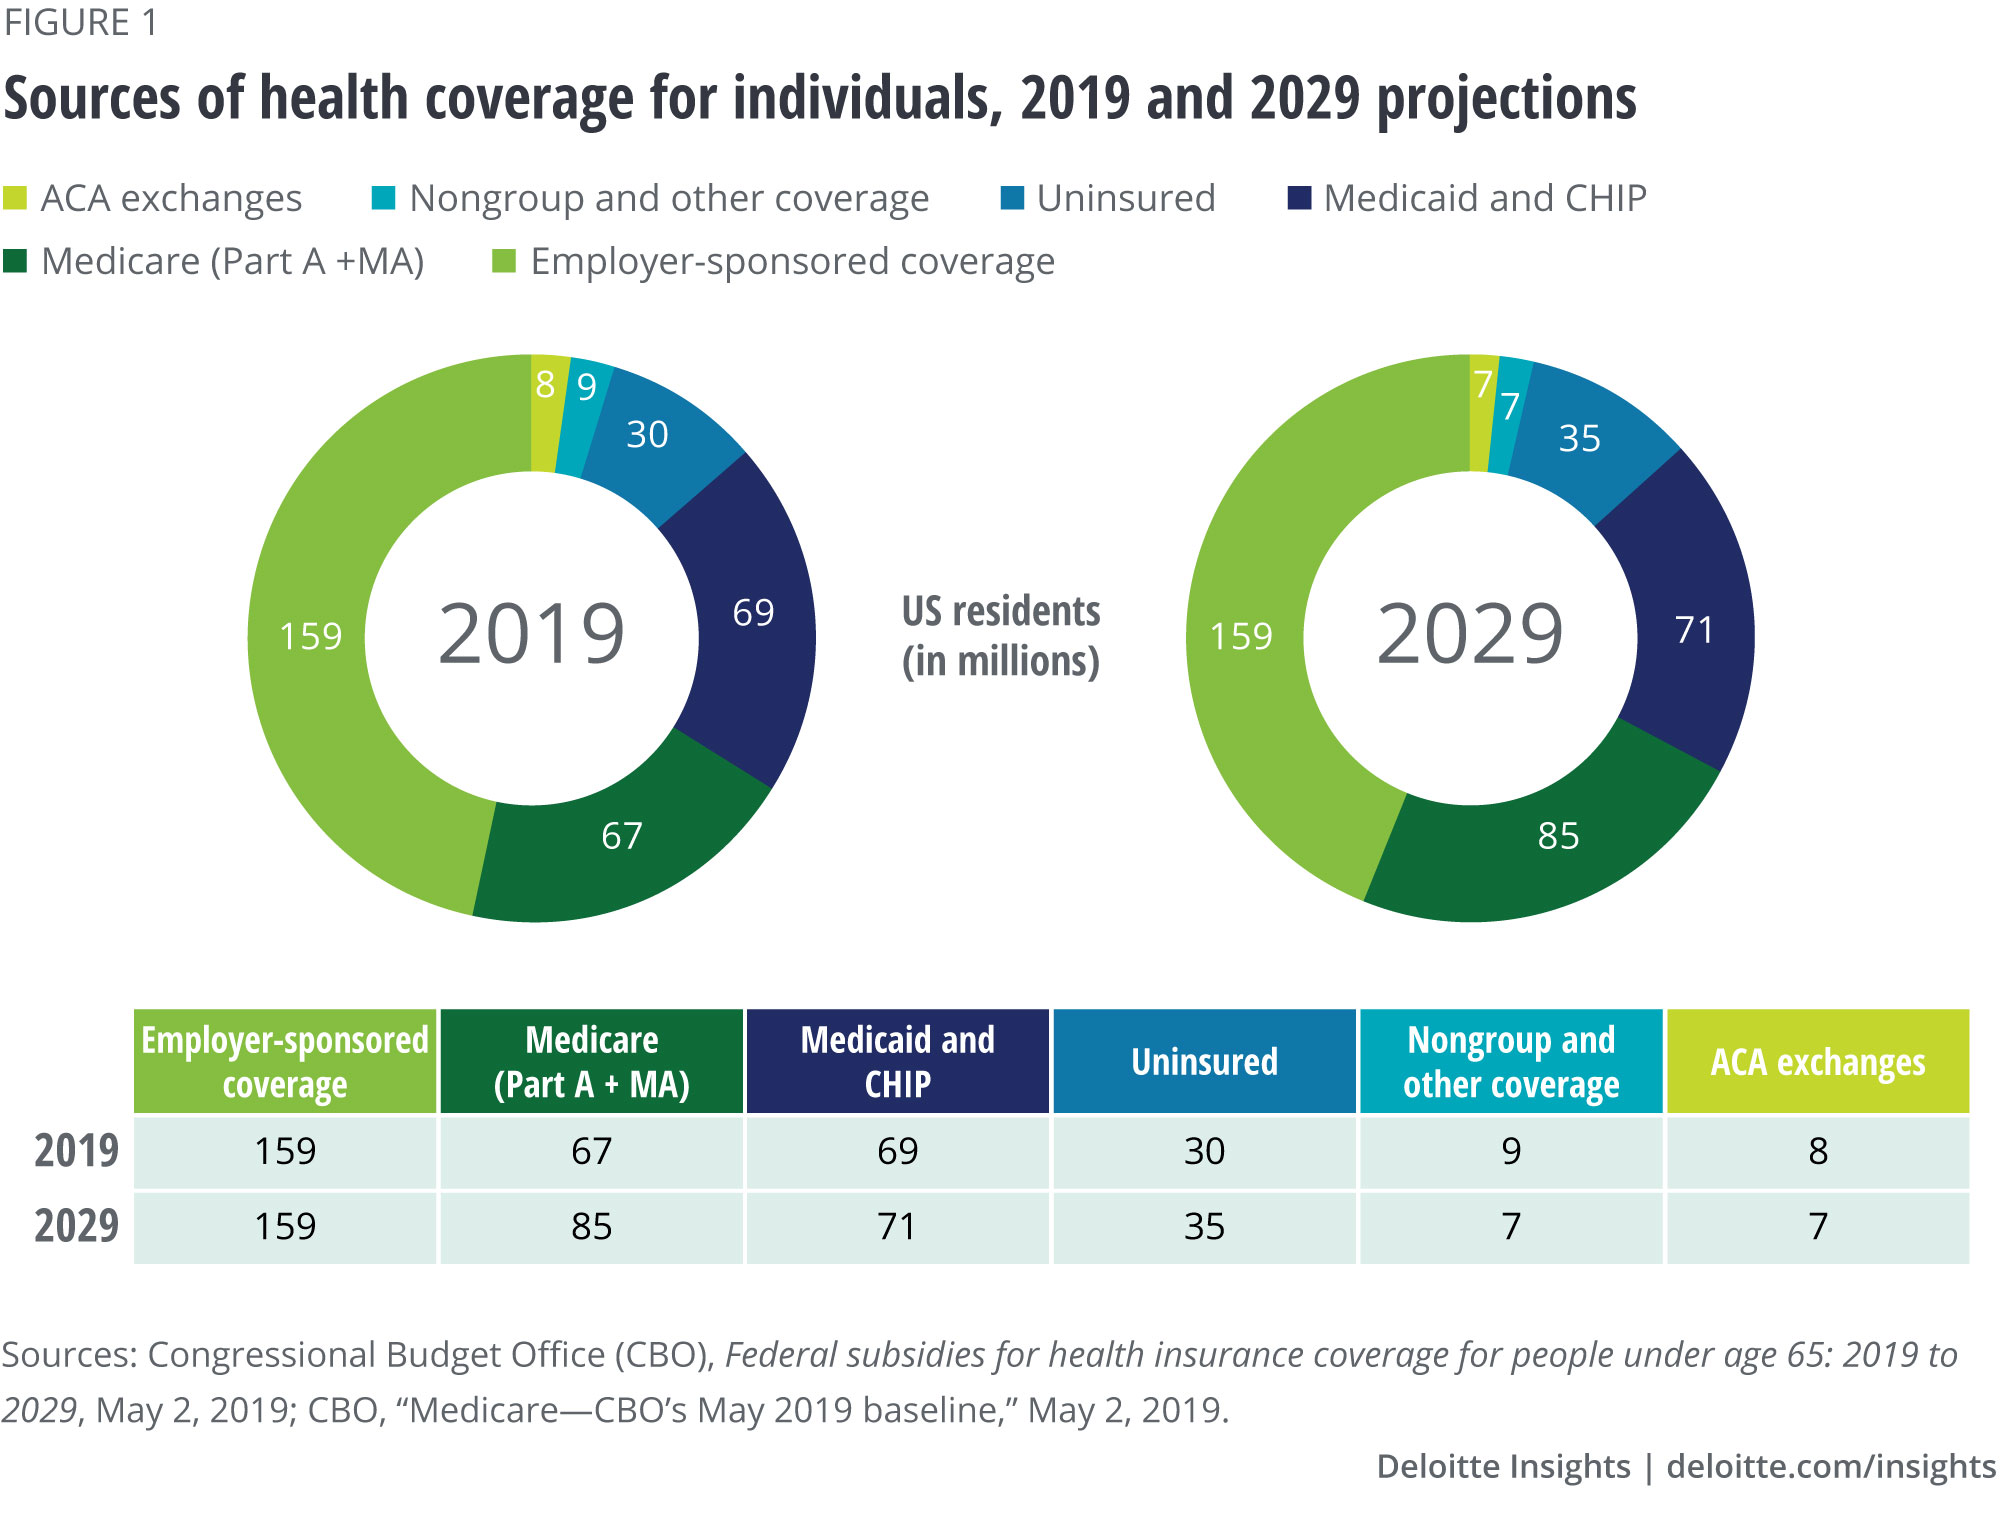 Sources of health coverage for individuals under age 65, 2019 and 2029 projections